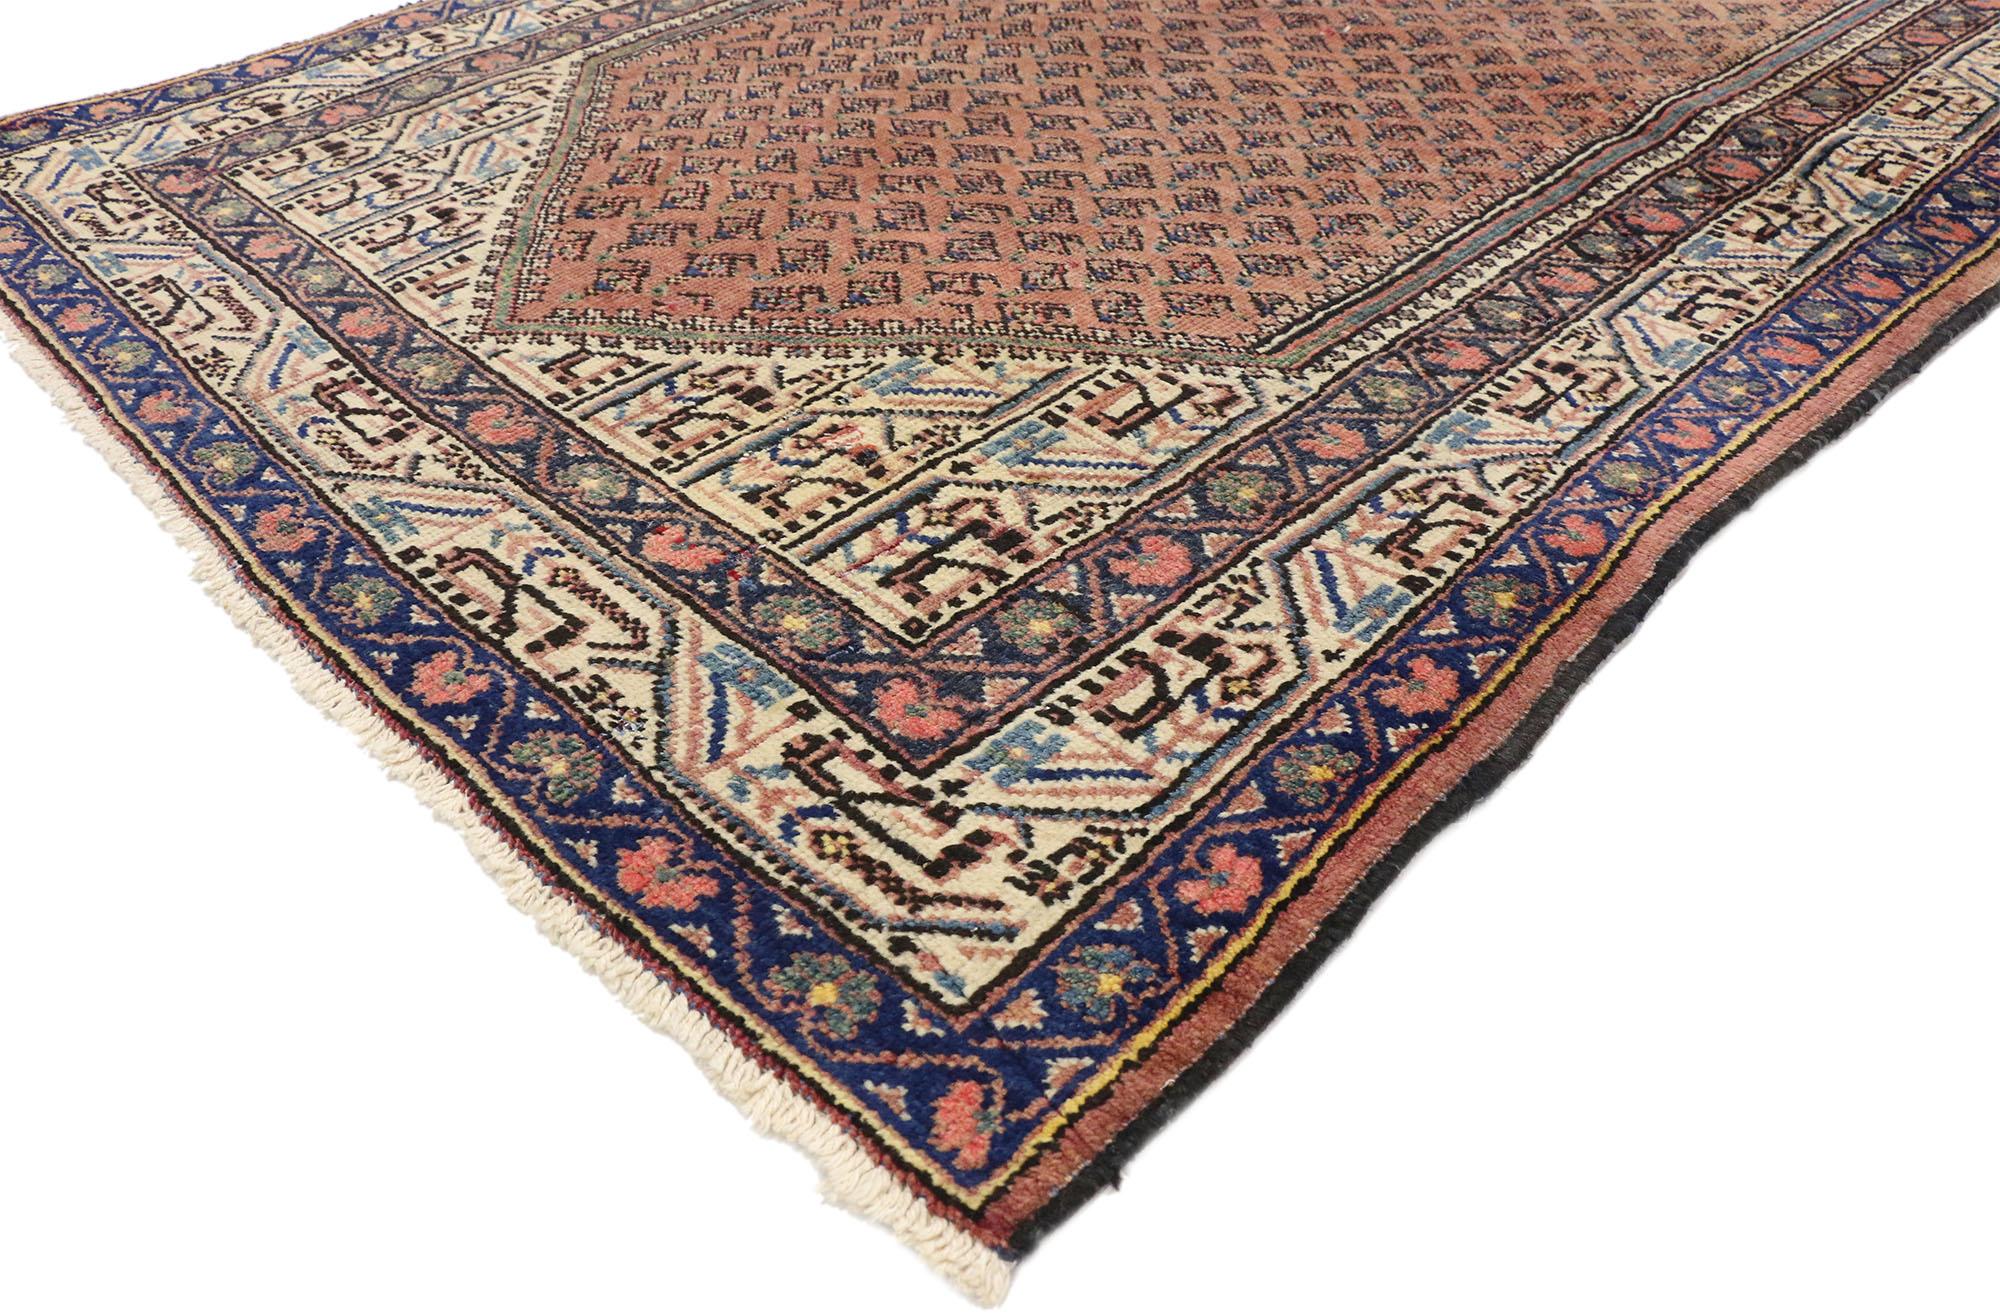 74580 vintage Persian Mahal rug with English Traditional style 04'02 x 06'09. Candid and sincere, this hand knotted wool vintage Persian Mahal rug beautifully embodies an English traditional style. The abrashed rust colored field is covered in an